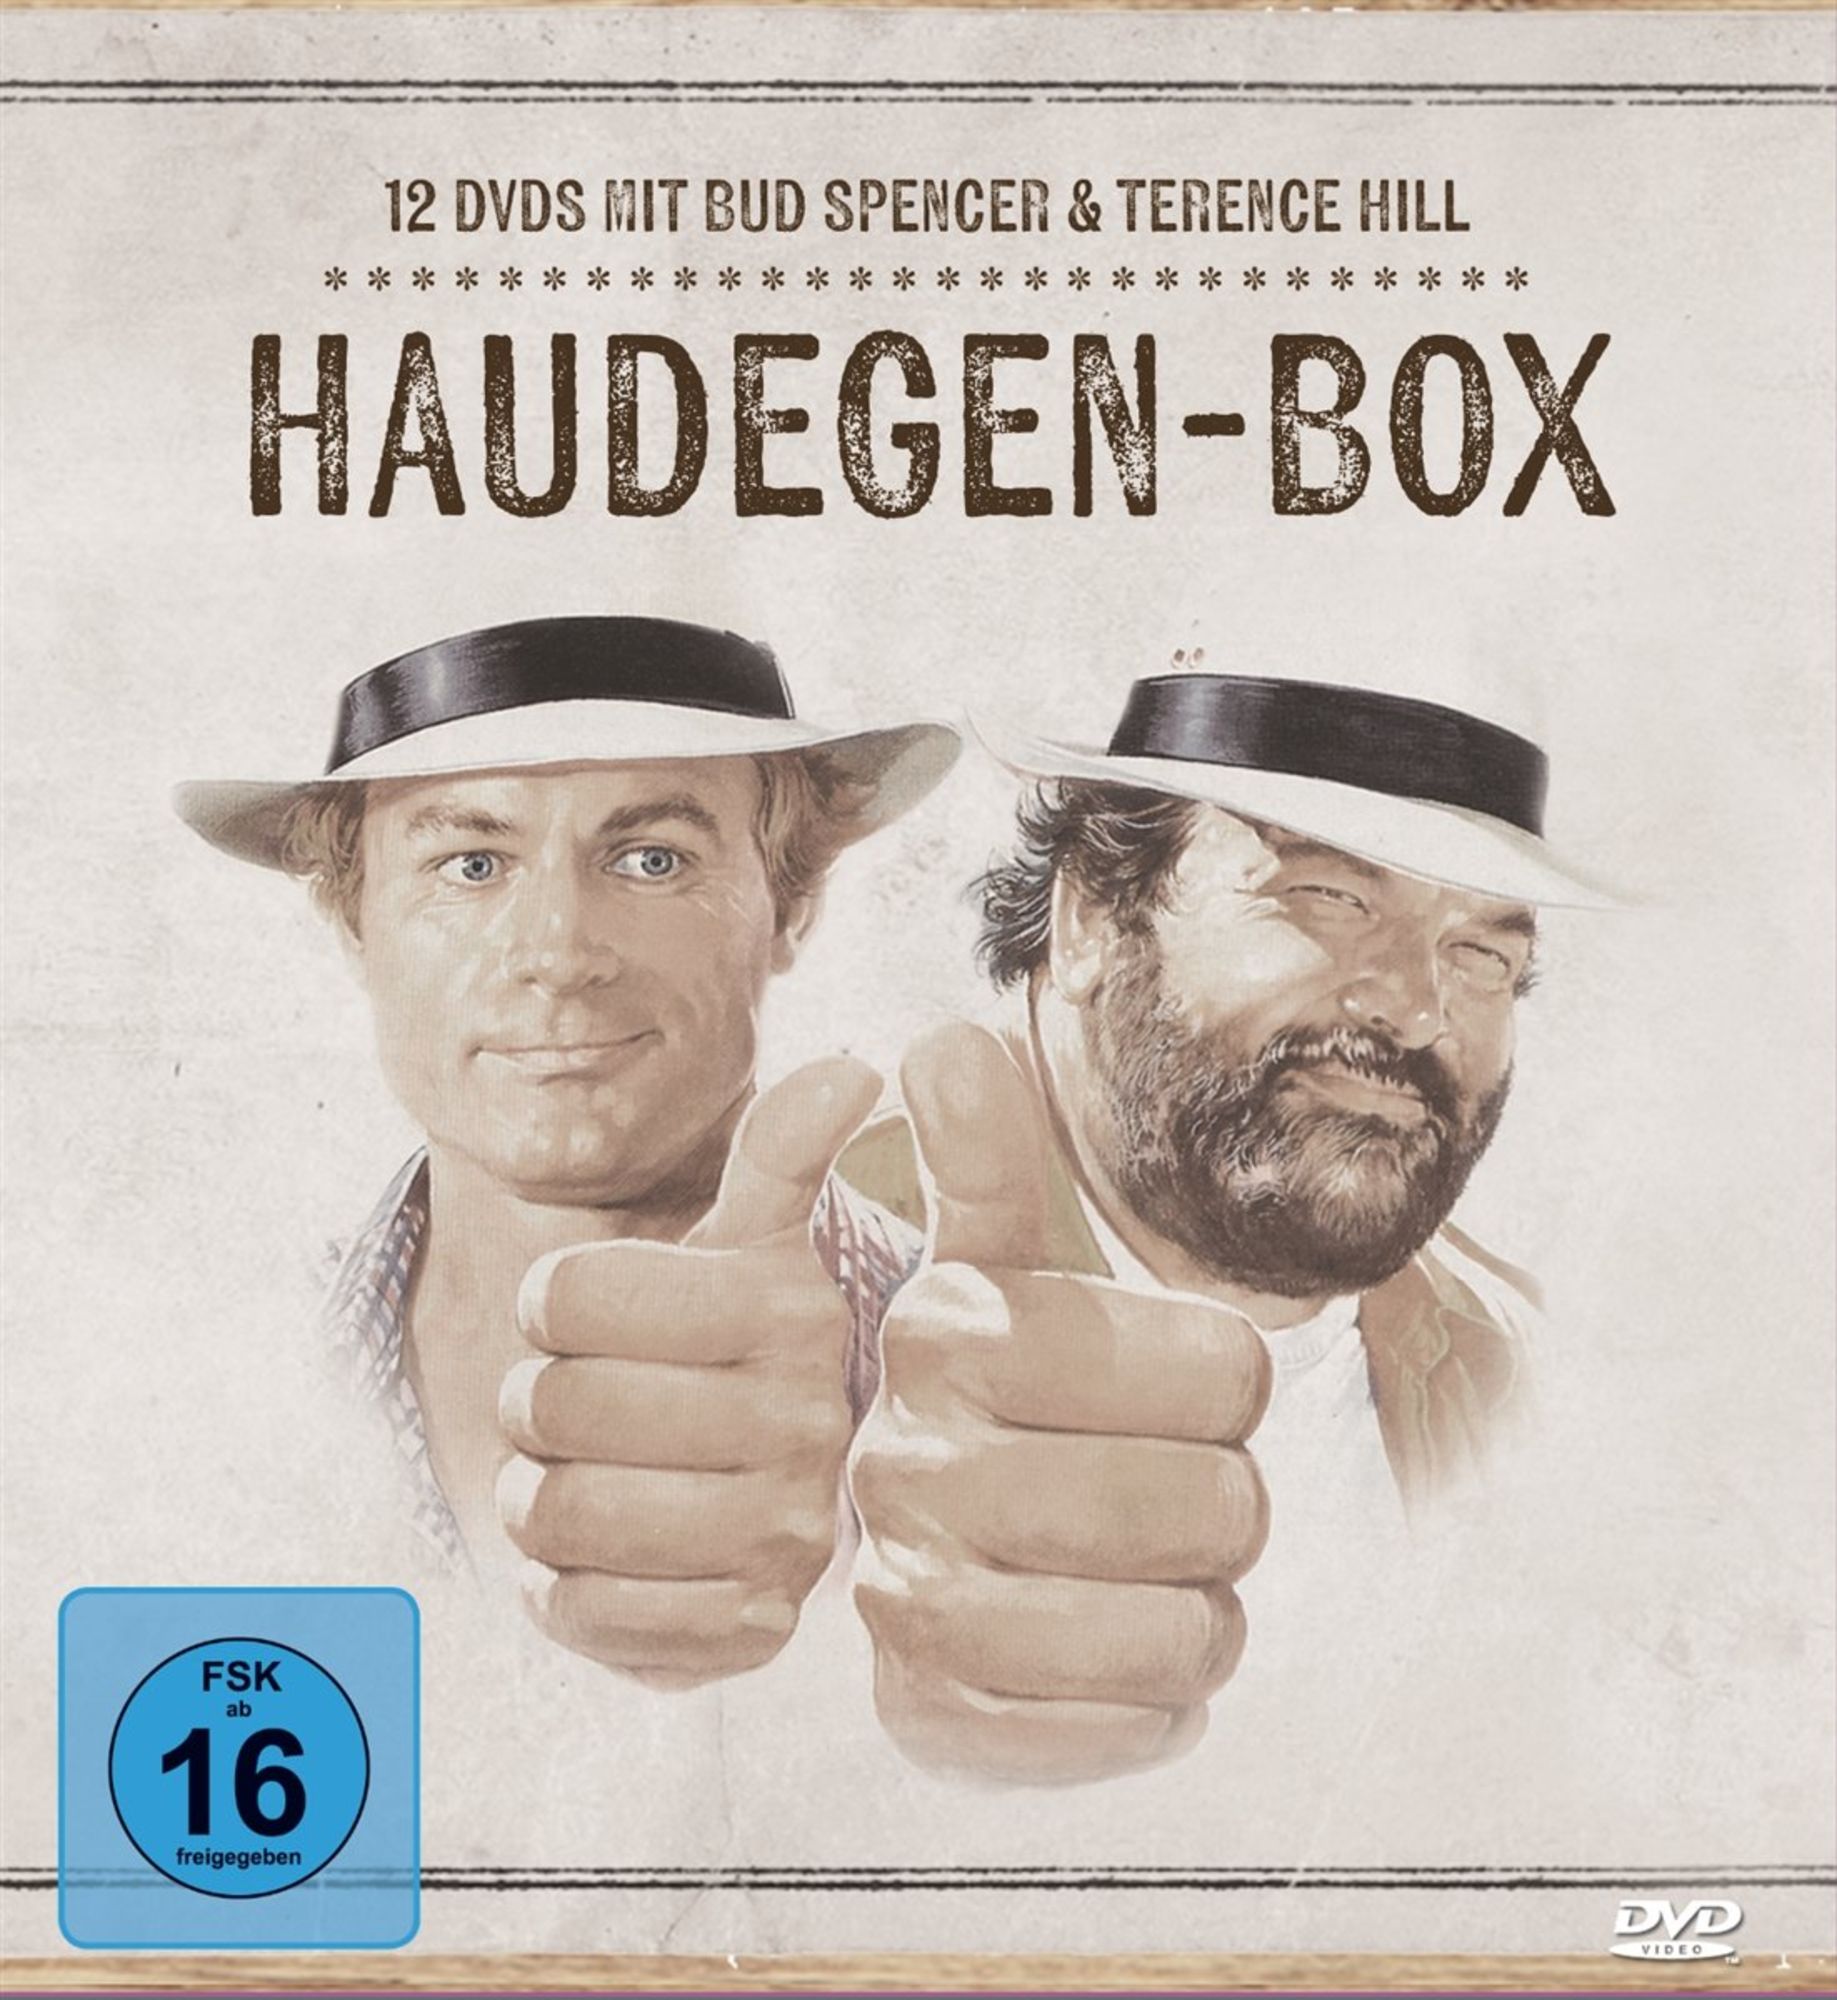 https://images.thalia.media/-/BF2000-2000/c97c9565feea4afe9b2f42d20feeef86/bud-spencer-terence-hill-12-dvd-box-12-dvds-dvd-terence-hill.jpeg